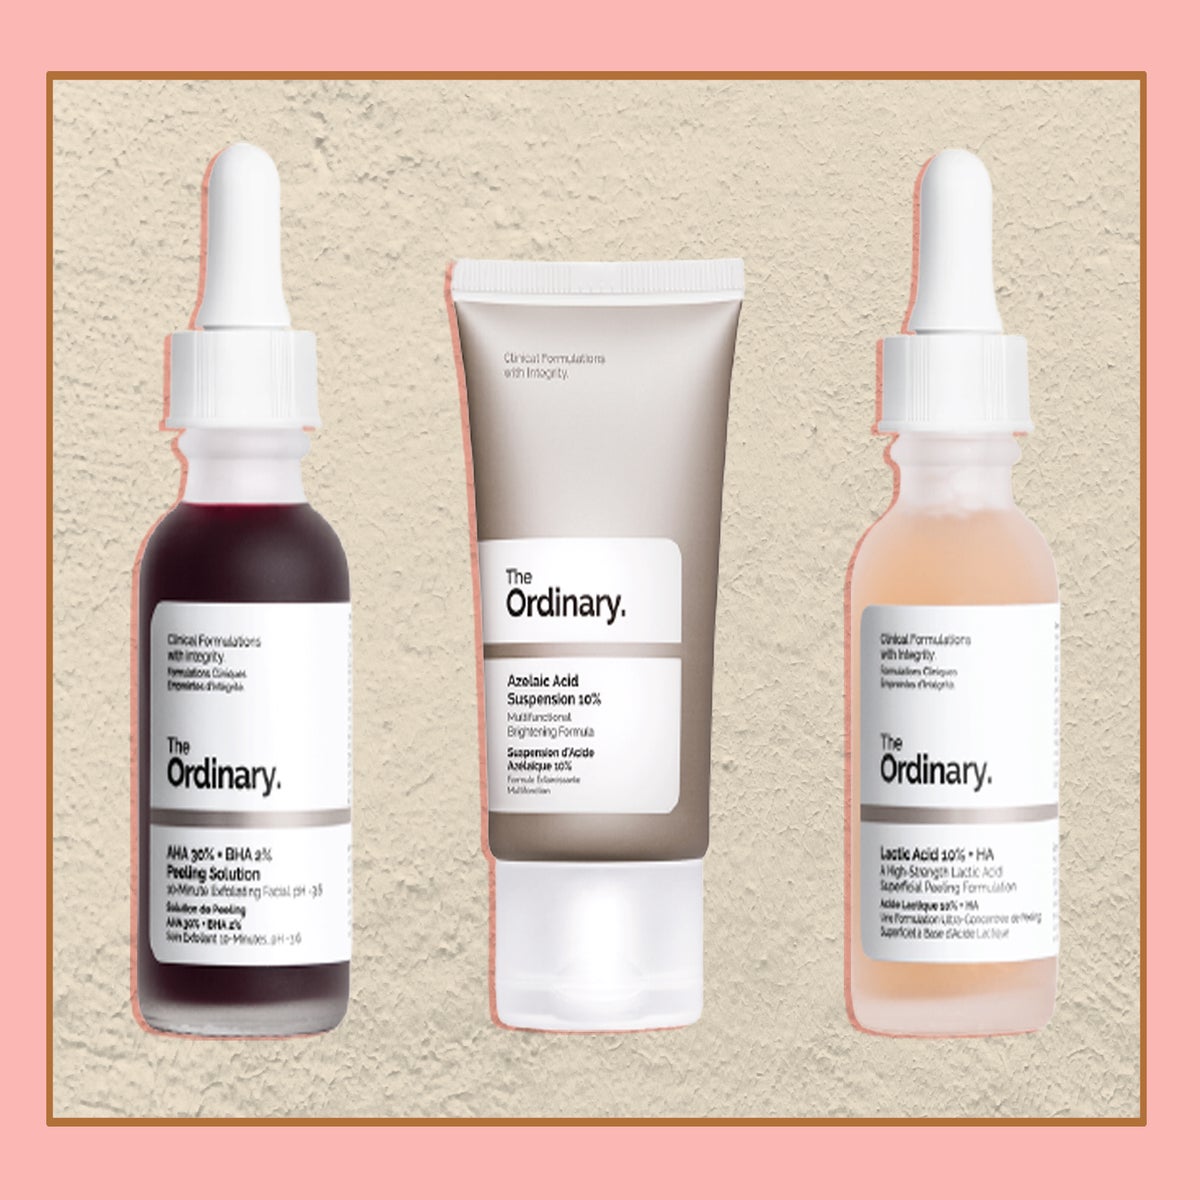 The Ordinary products acne-prone skin | Independent